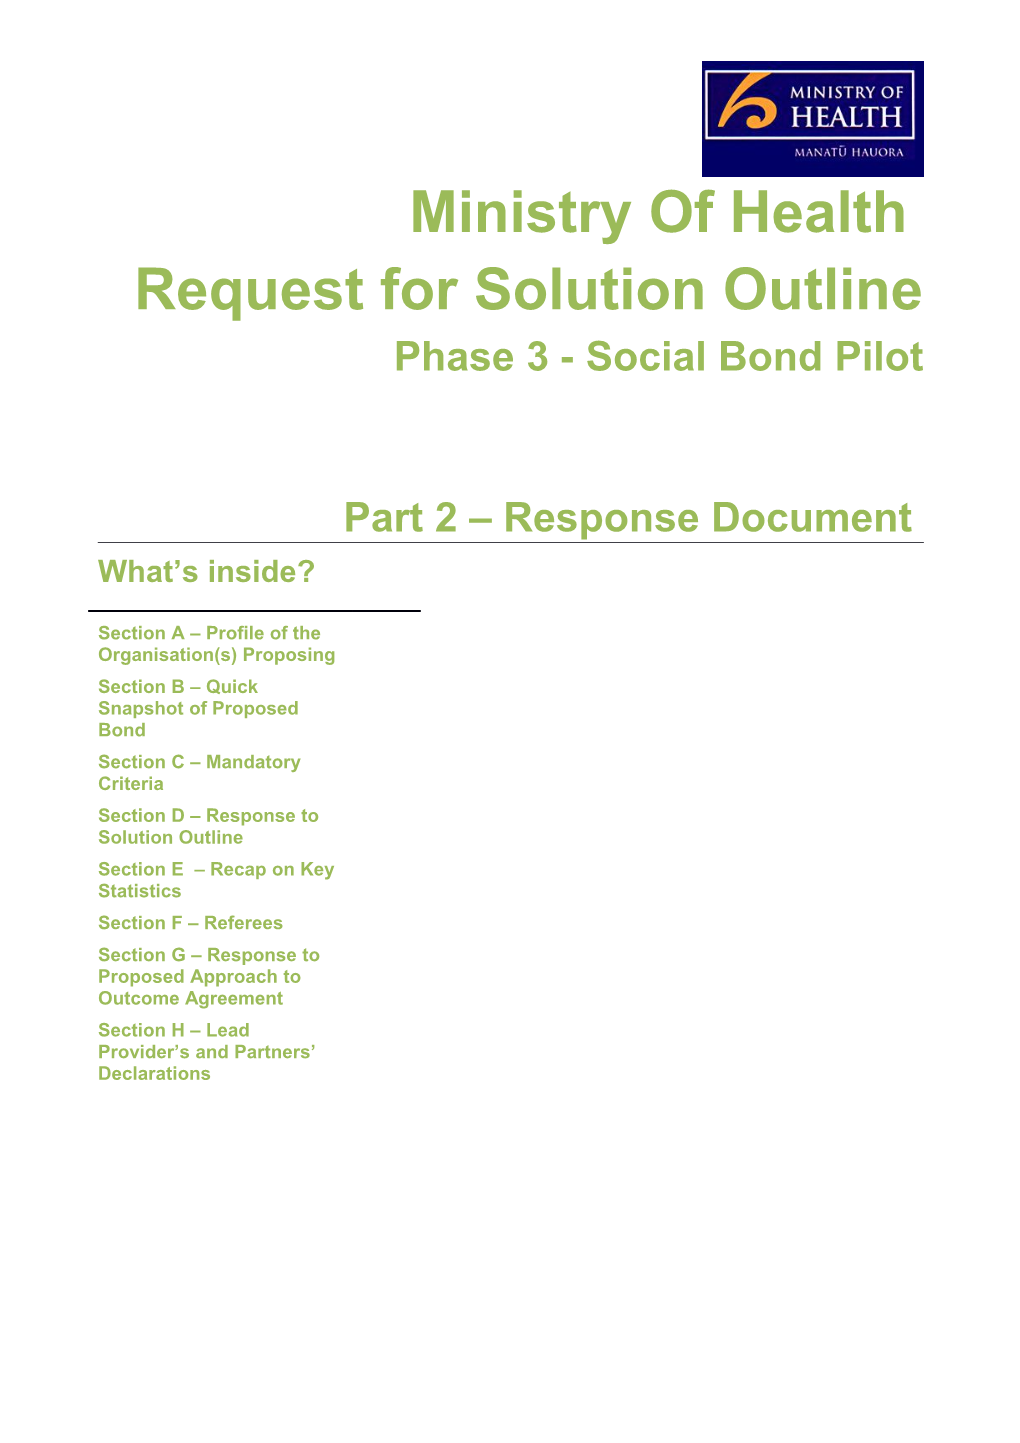 Request for Solution Outline